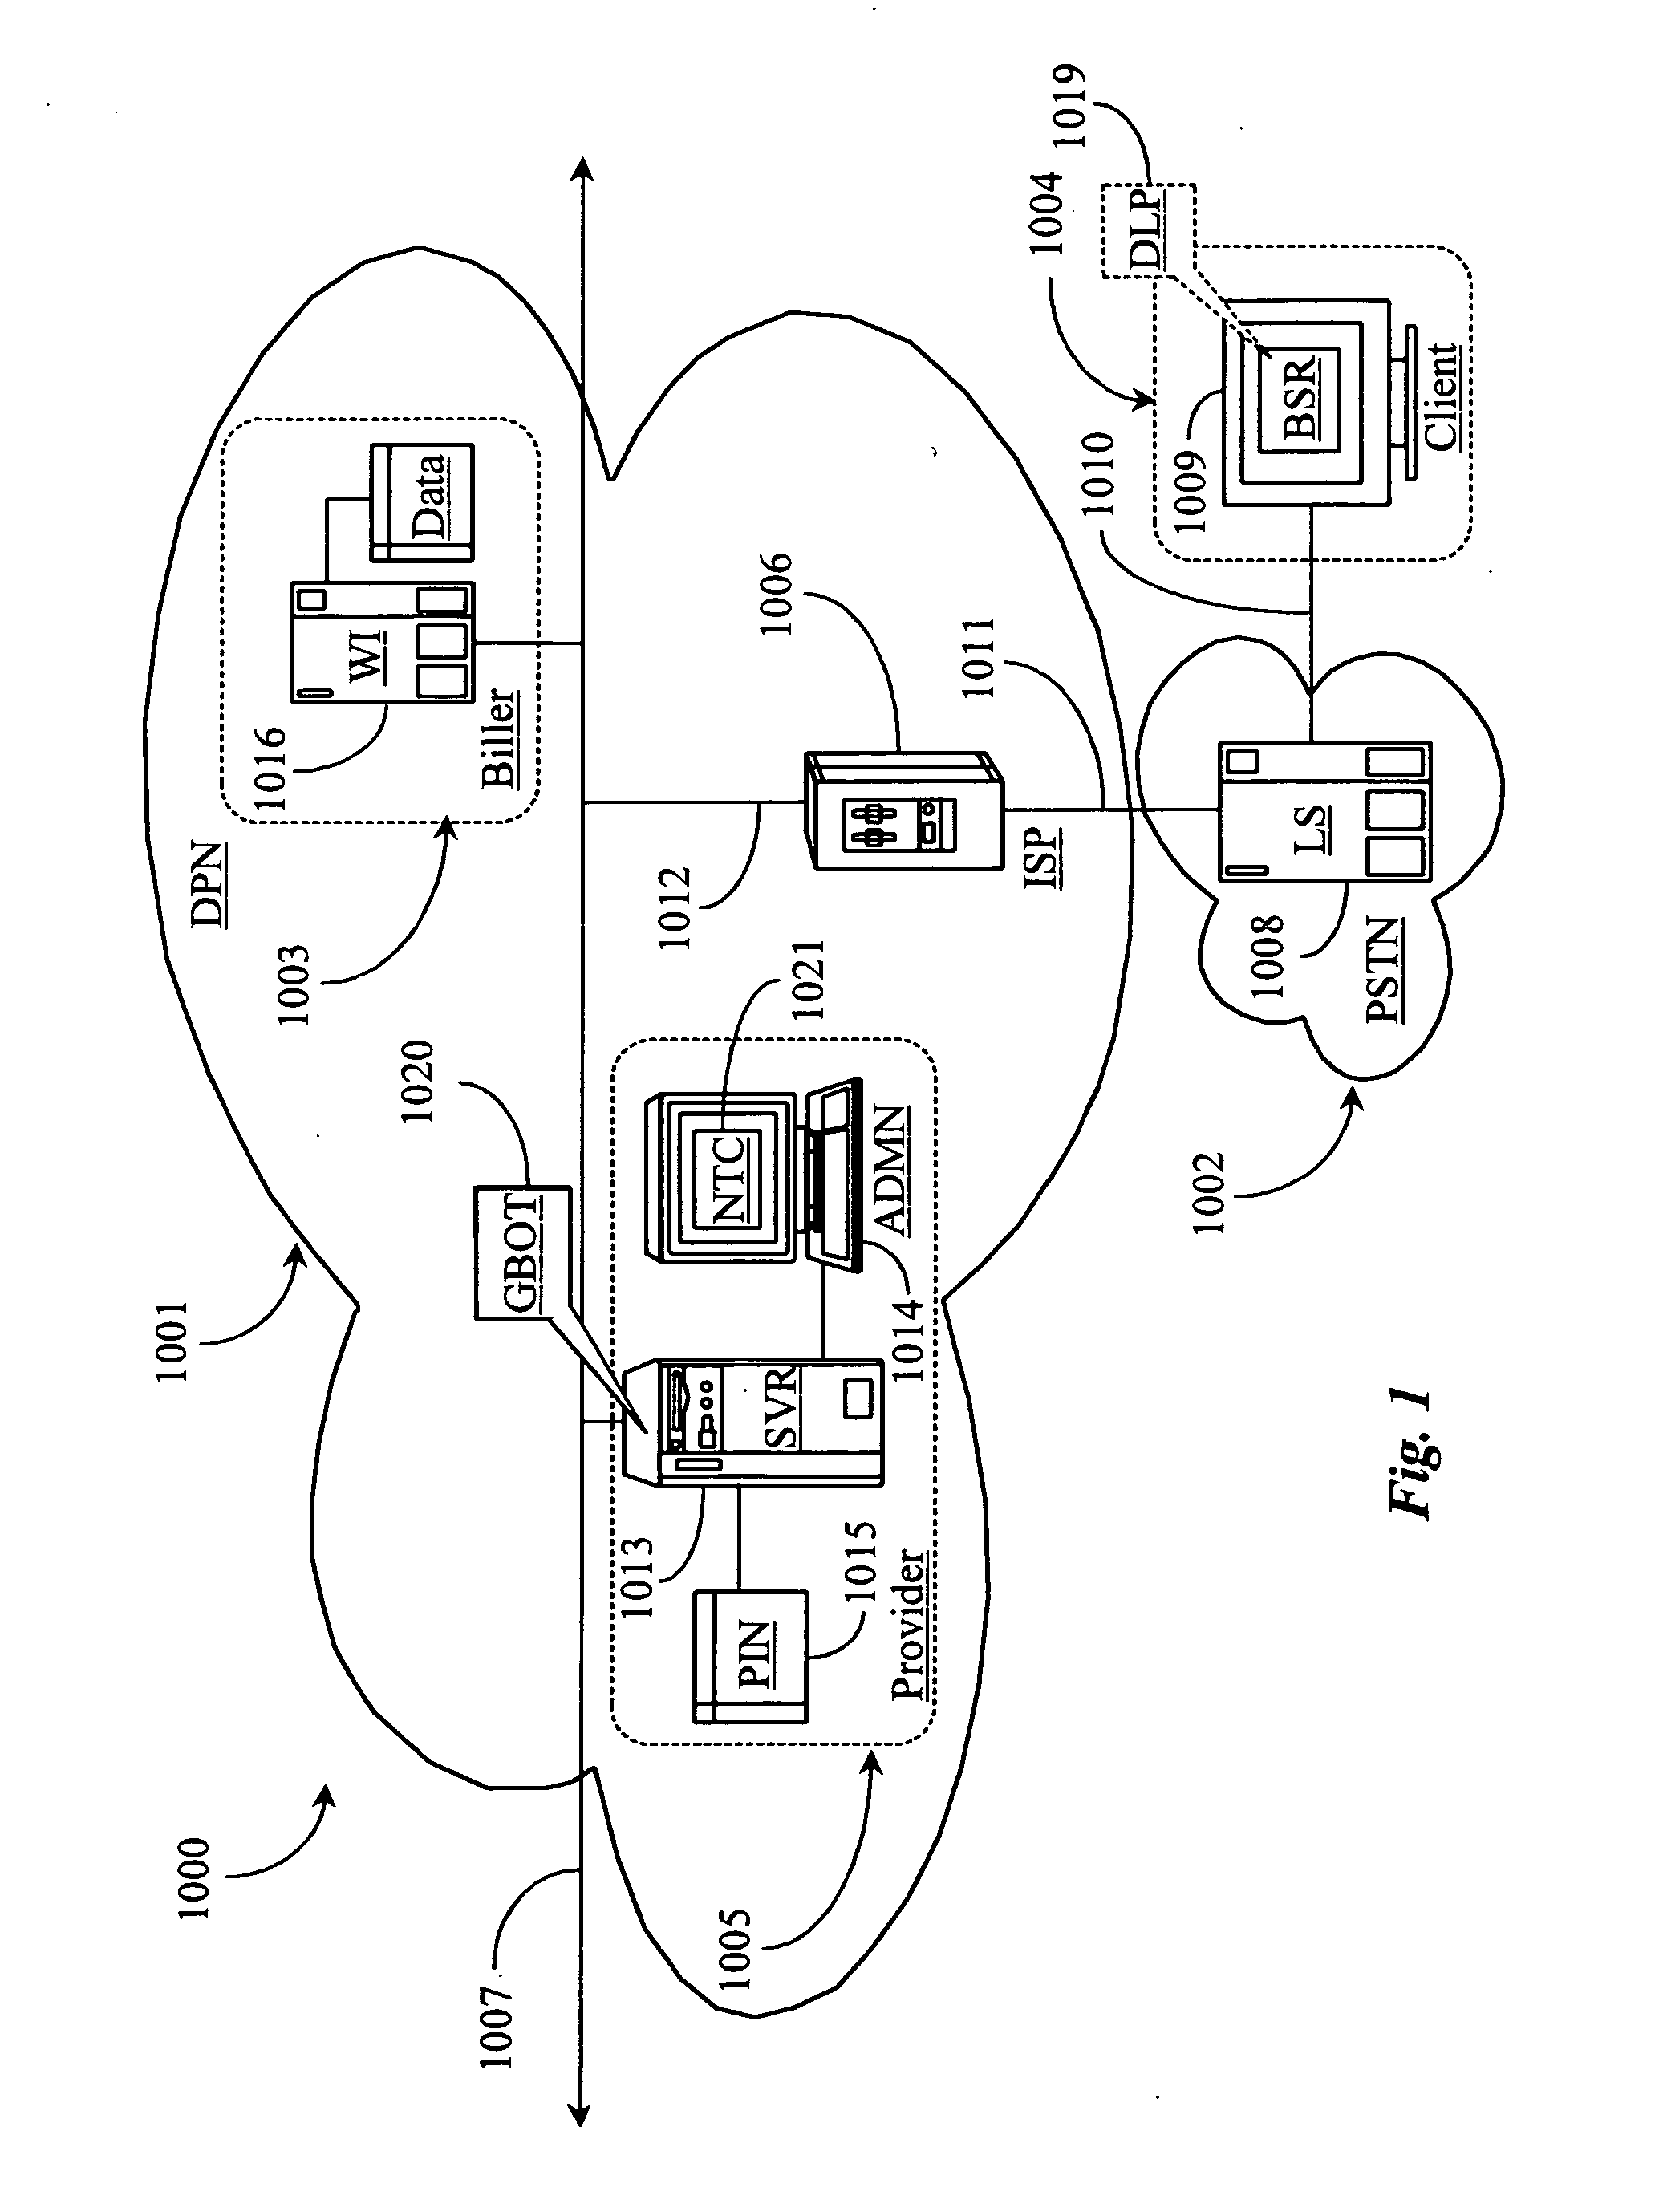 Method and system for network transaction management